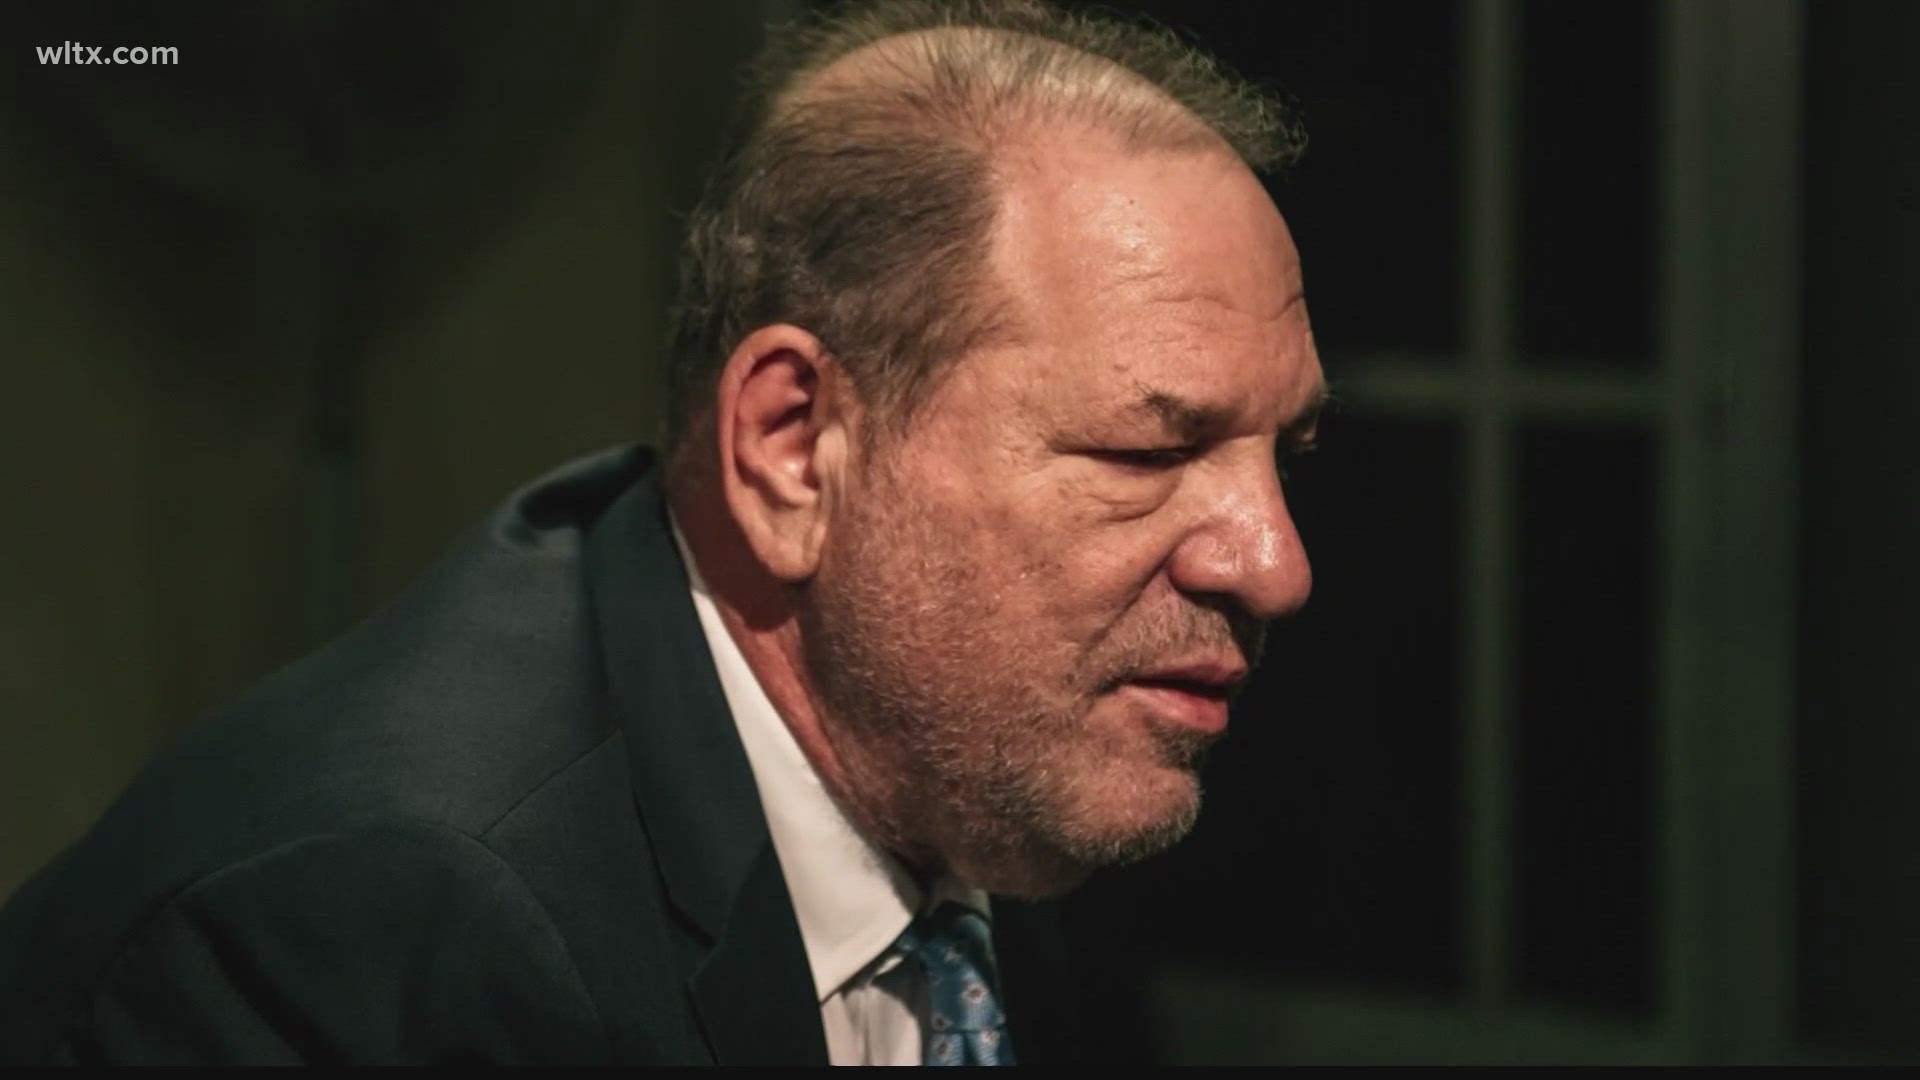 Harvey Weinstein's 2020 conviction on rape charges has been overturned by the State of New York Court of Appeals, which ordered a new trial.